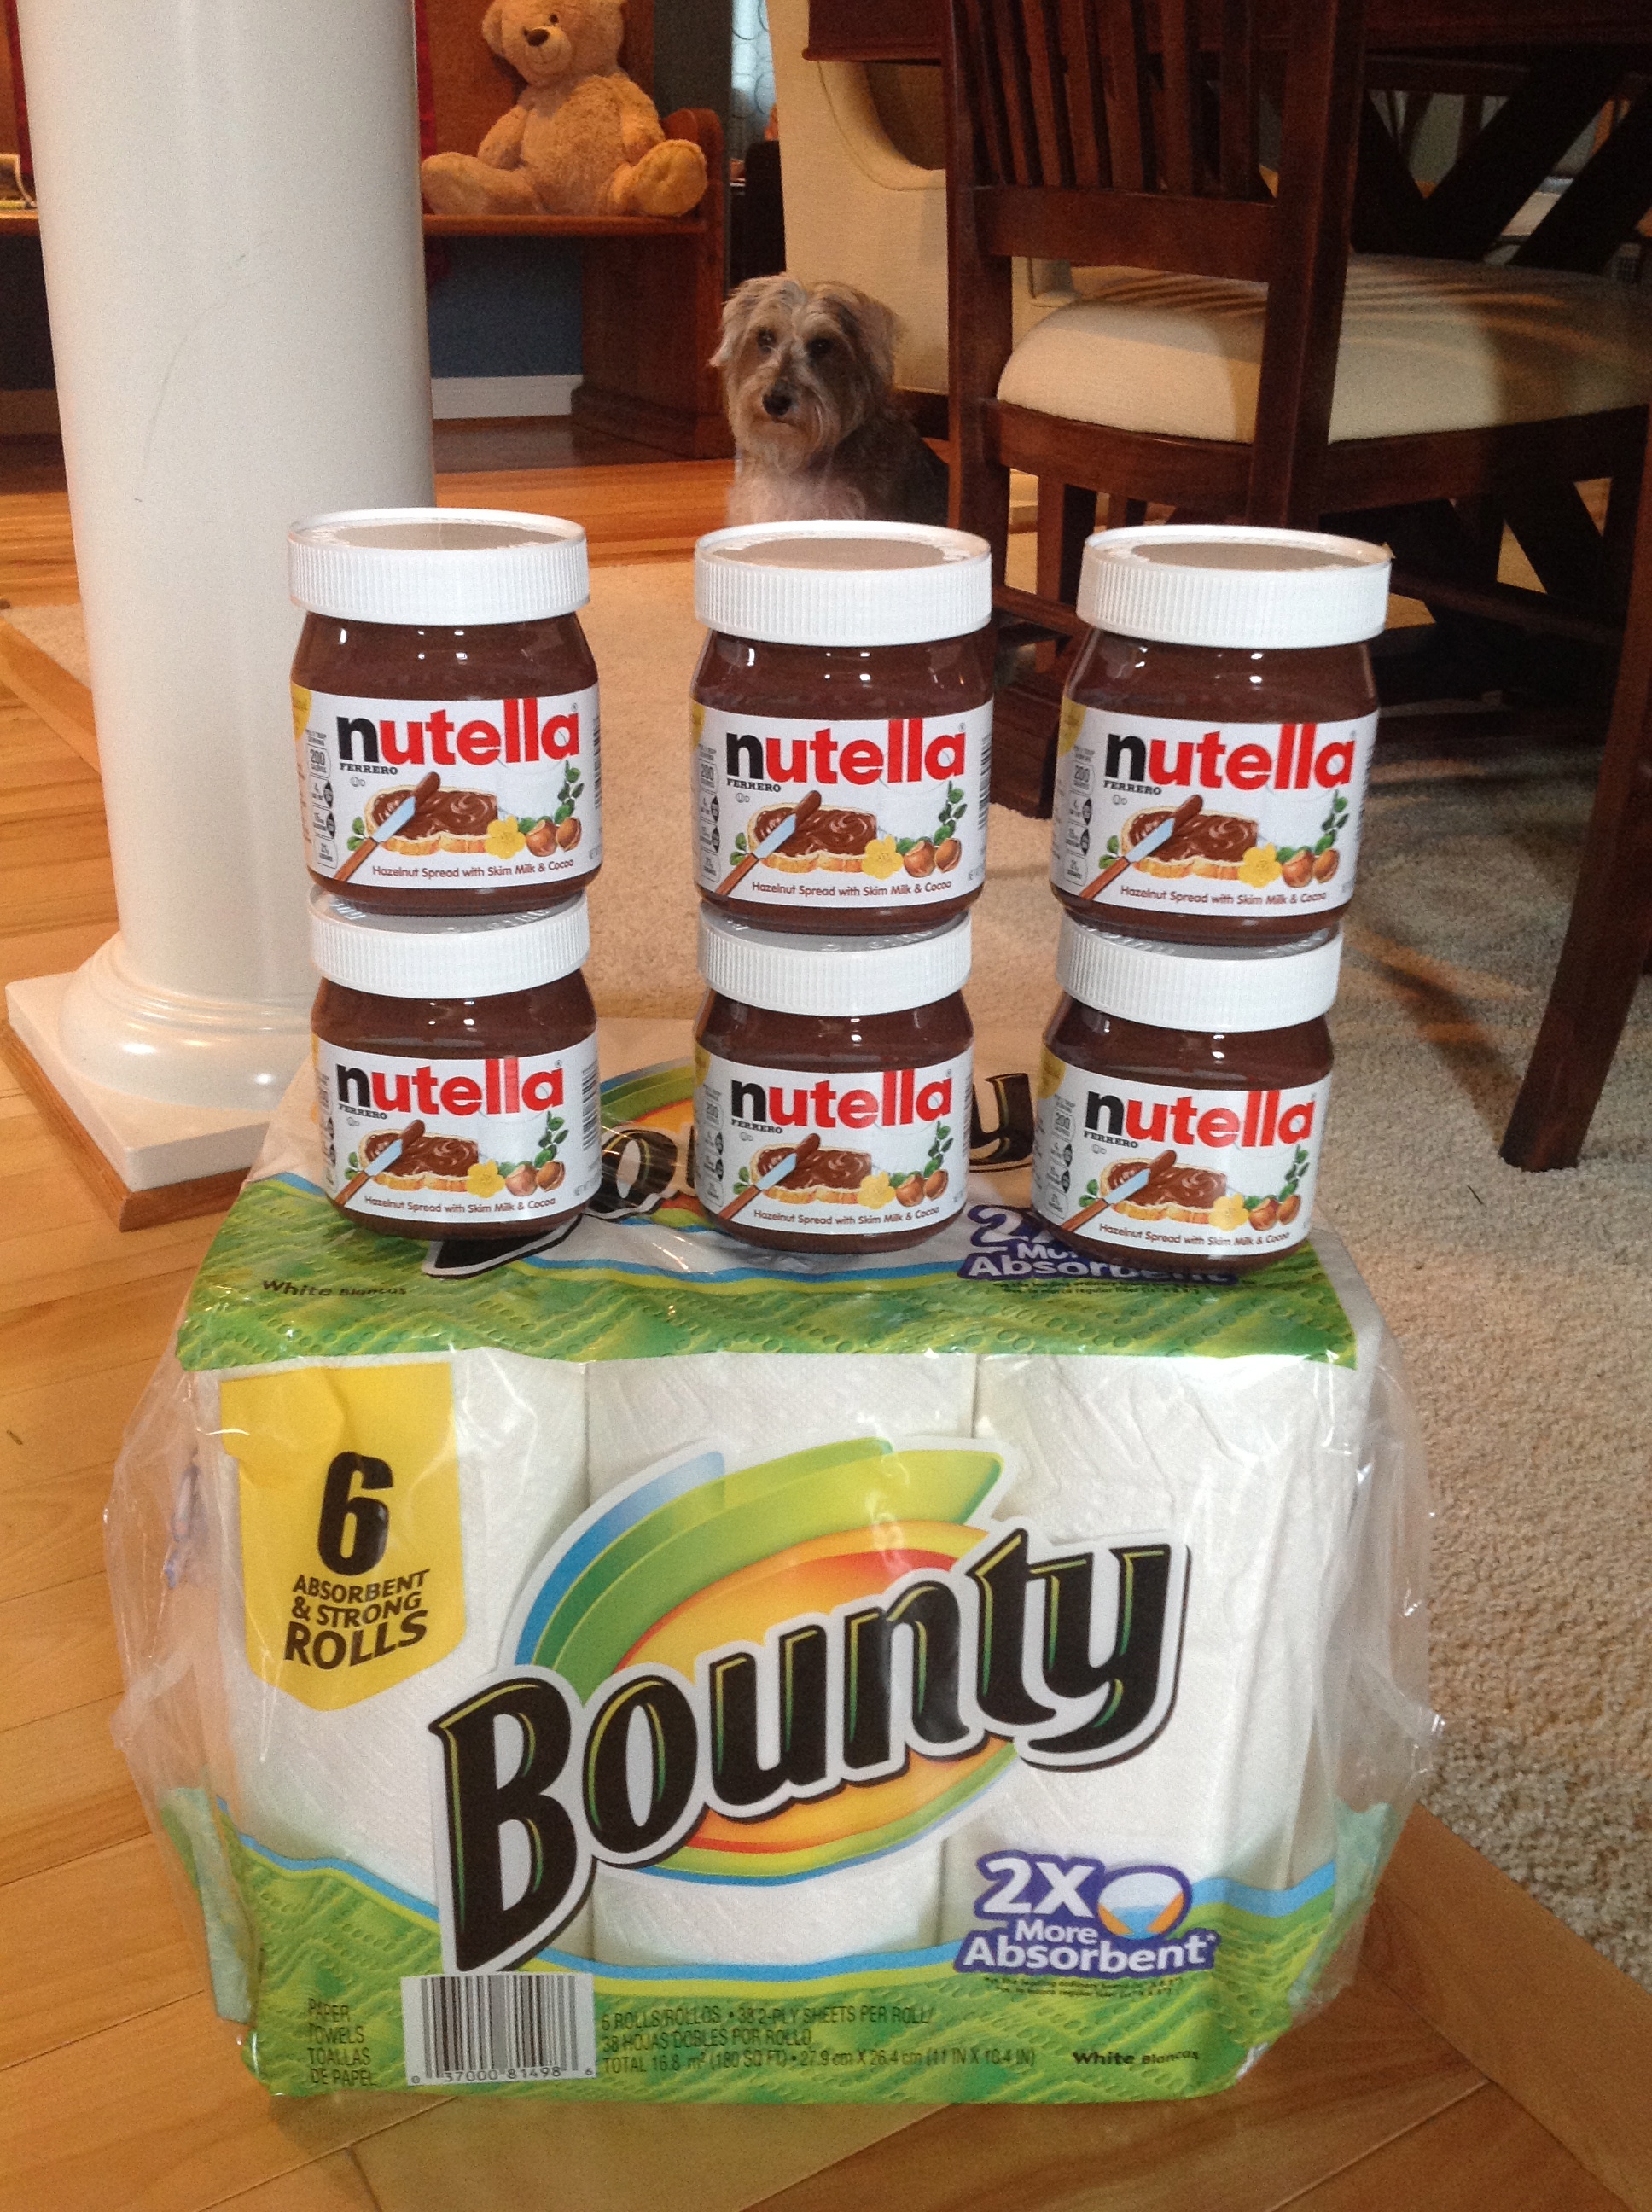 Bartells:after coupon I paid $13 ( I had BOGO coupons for the nutella,they're onsale for $3)